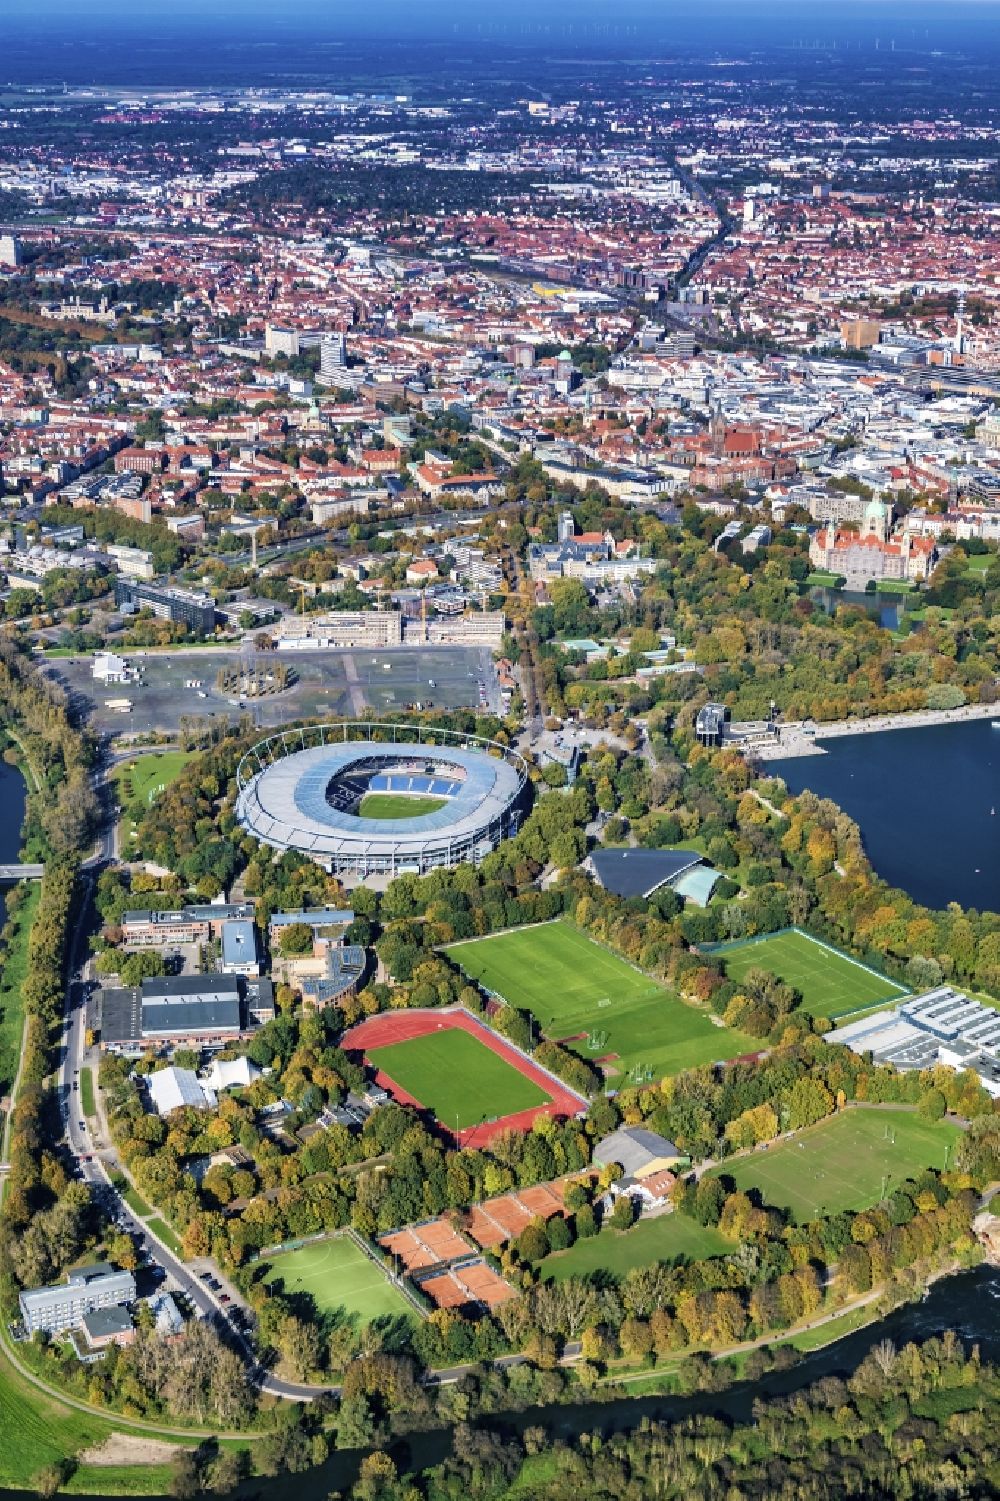 Hannover from above - HDI Arena stadium in Calenberger Neustadt district of Hanover, in Lower Saxony